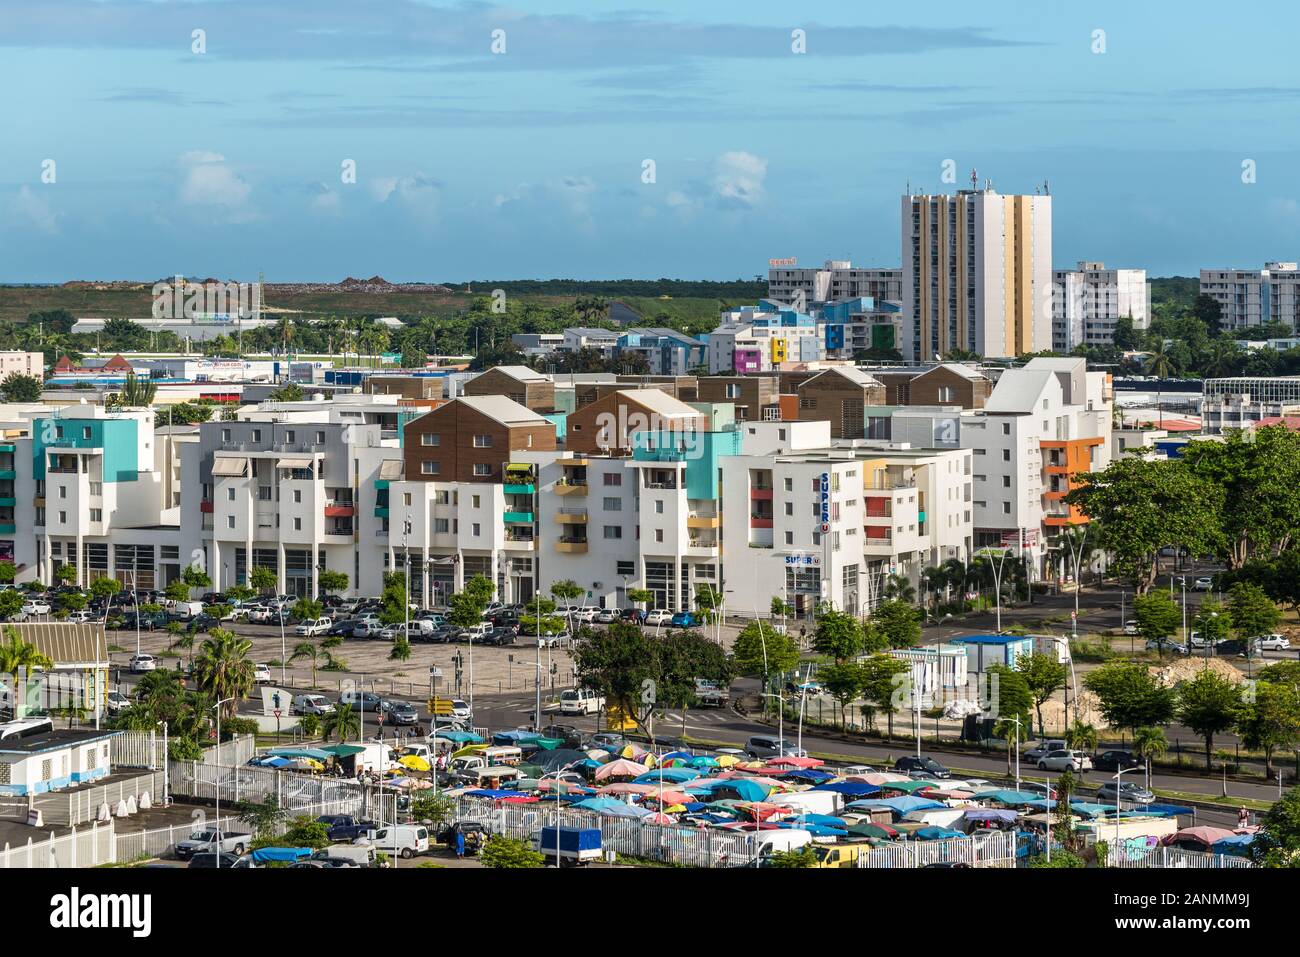 Pointe-a-Pitre, Guadeloupe - December 14, 2018: View of Pointe-a-Pitre from the cruise ship, Guadeloupe, an overseas region of France located in the L Stock Photo